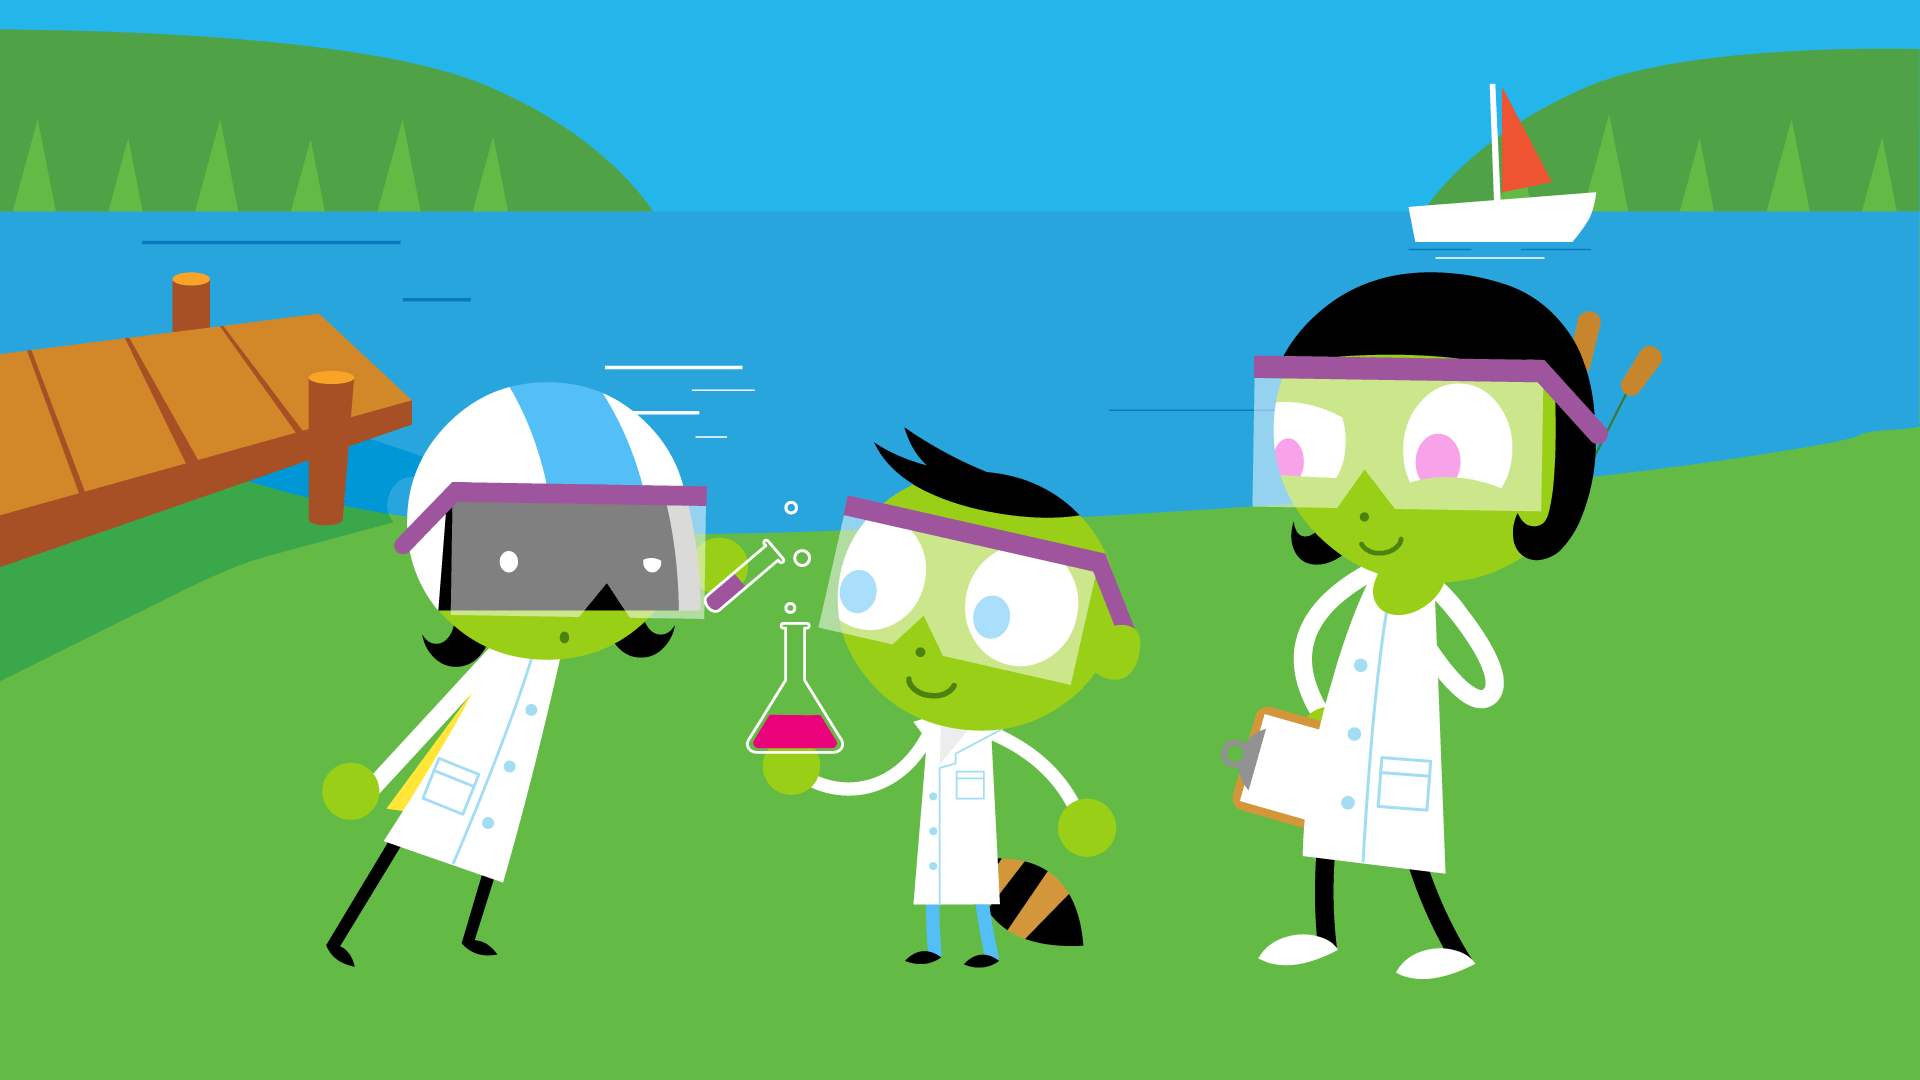 PBS Kids characters dressed as scientists